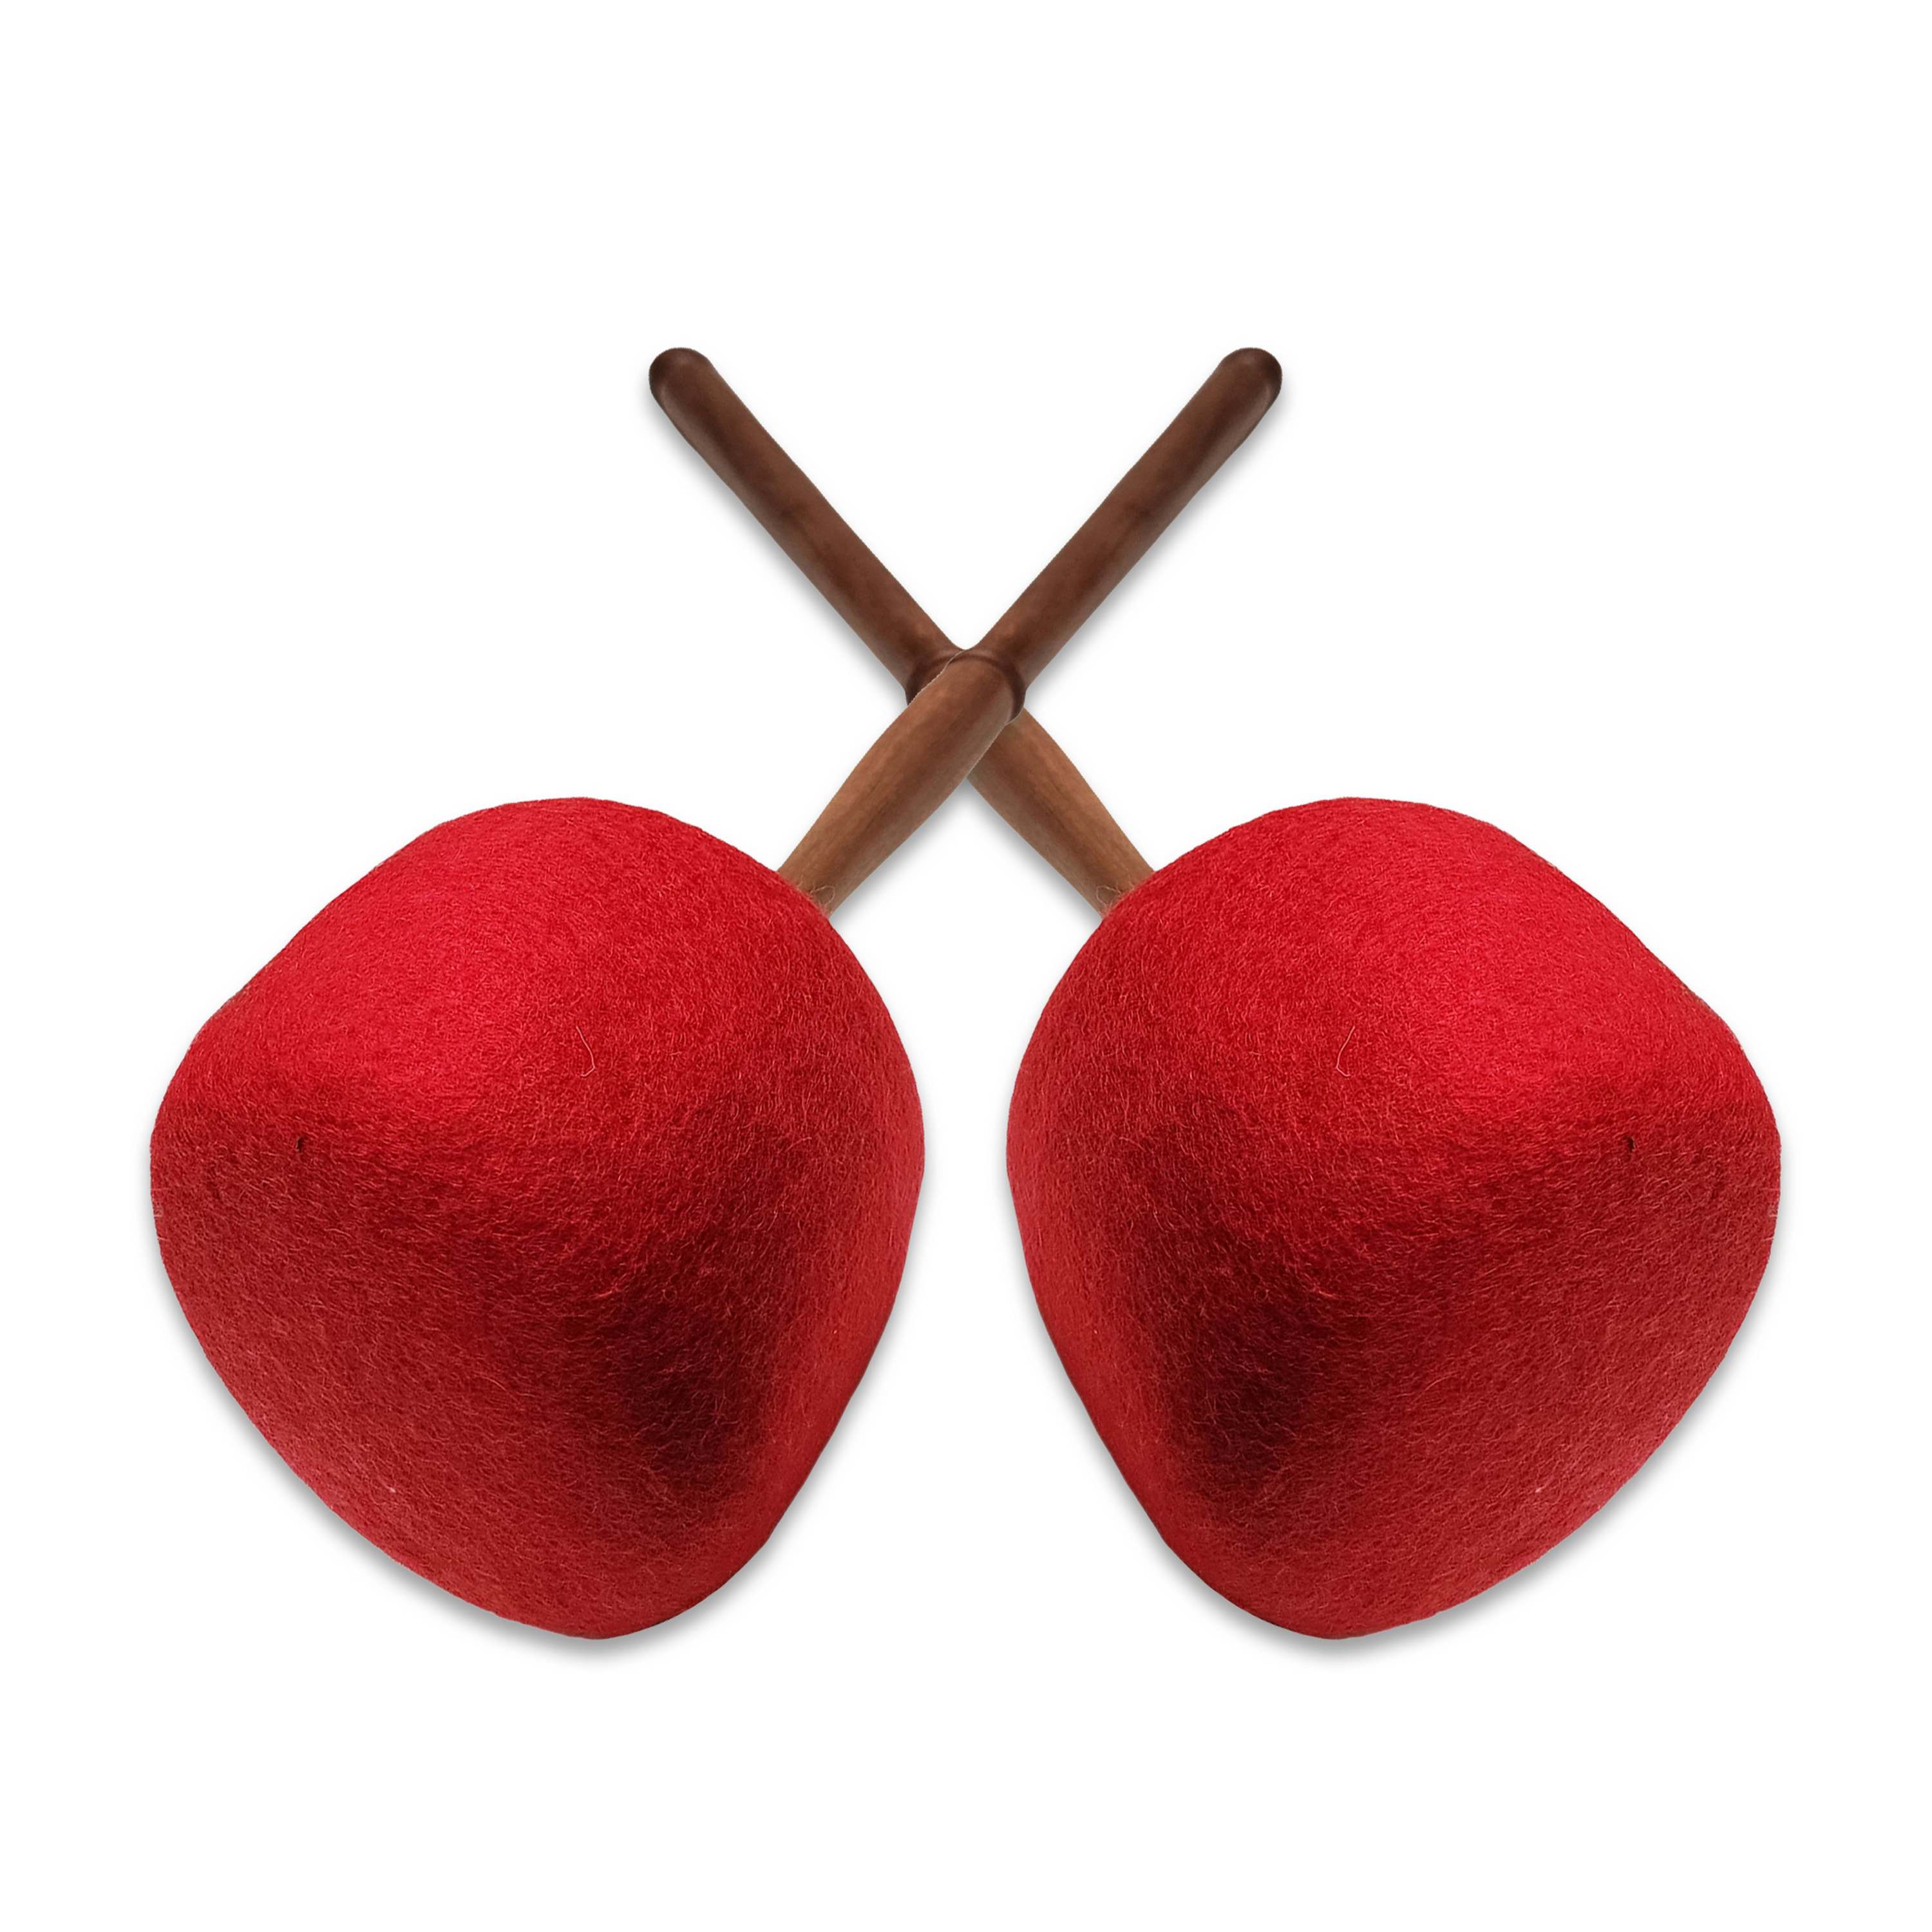 Singing Bowl Accessories, Soft Felt Beating Mallet, Extra Large